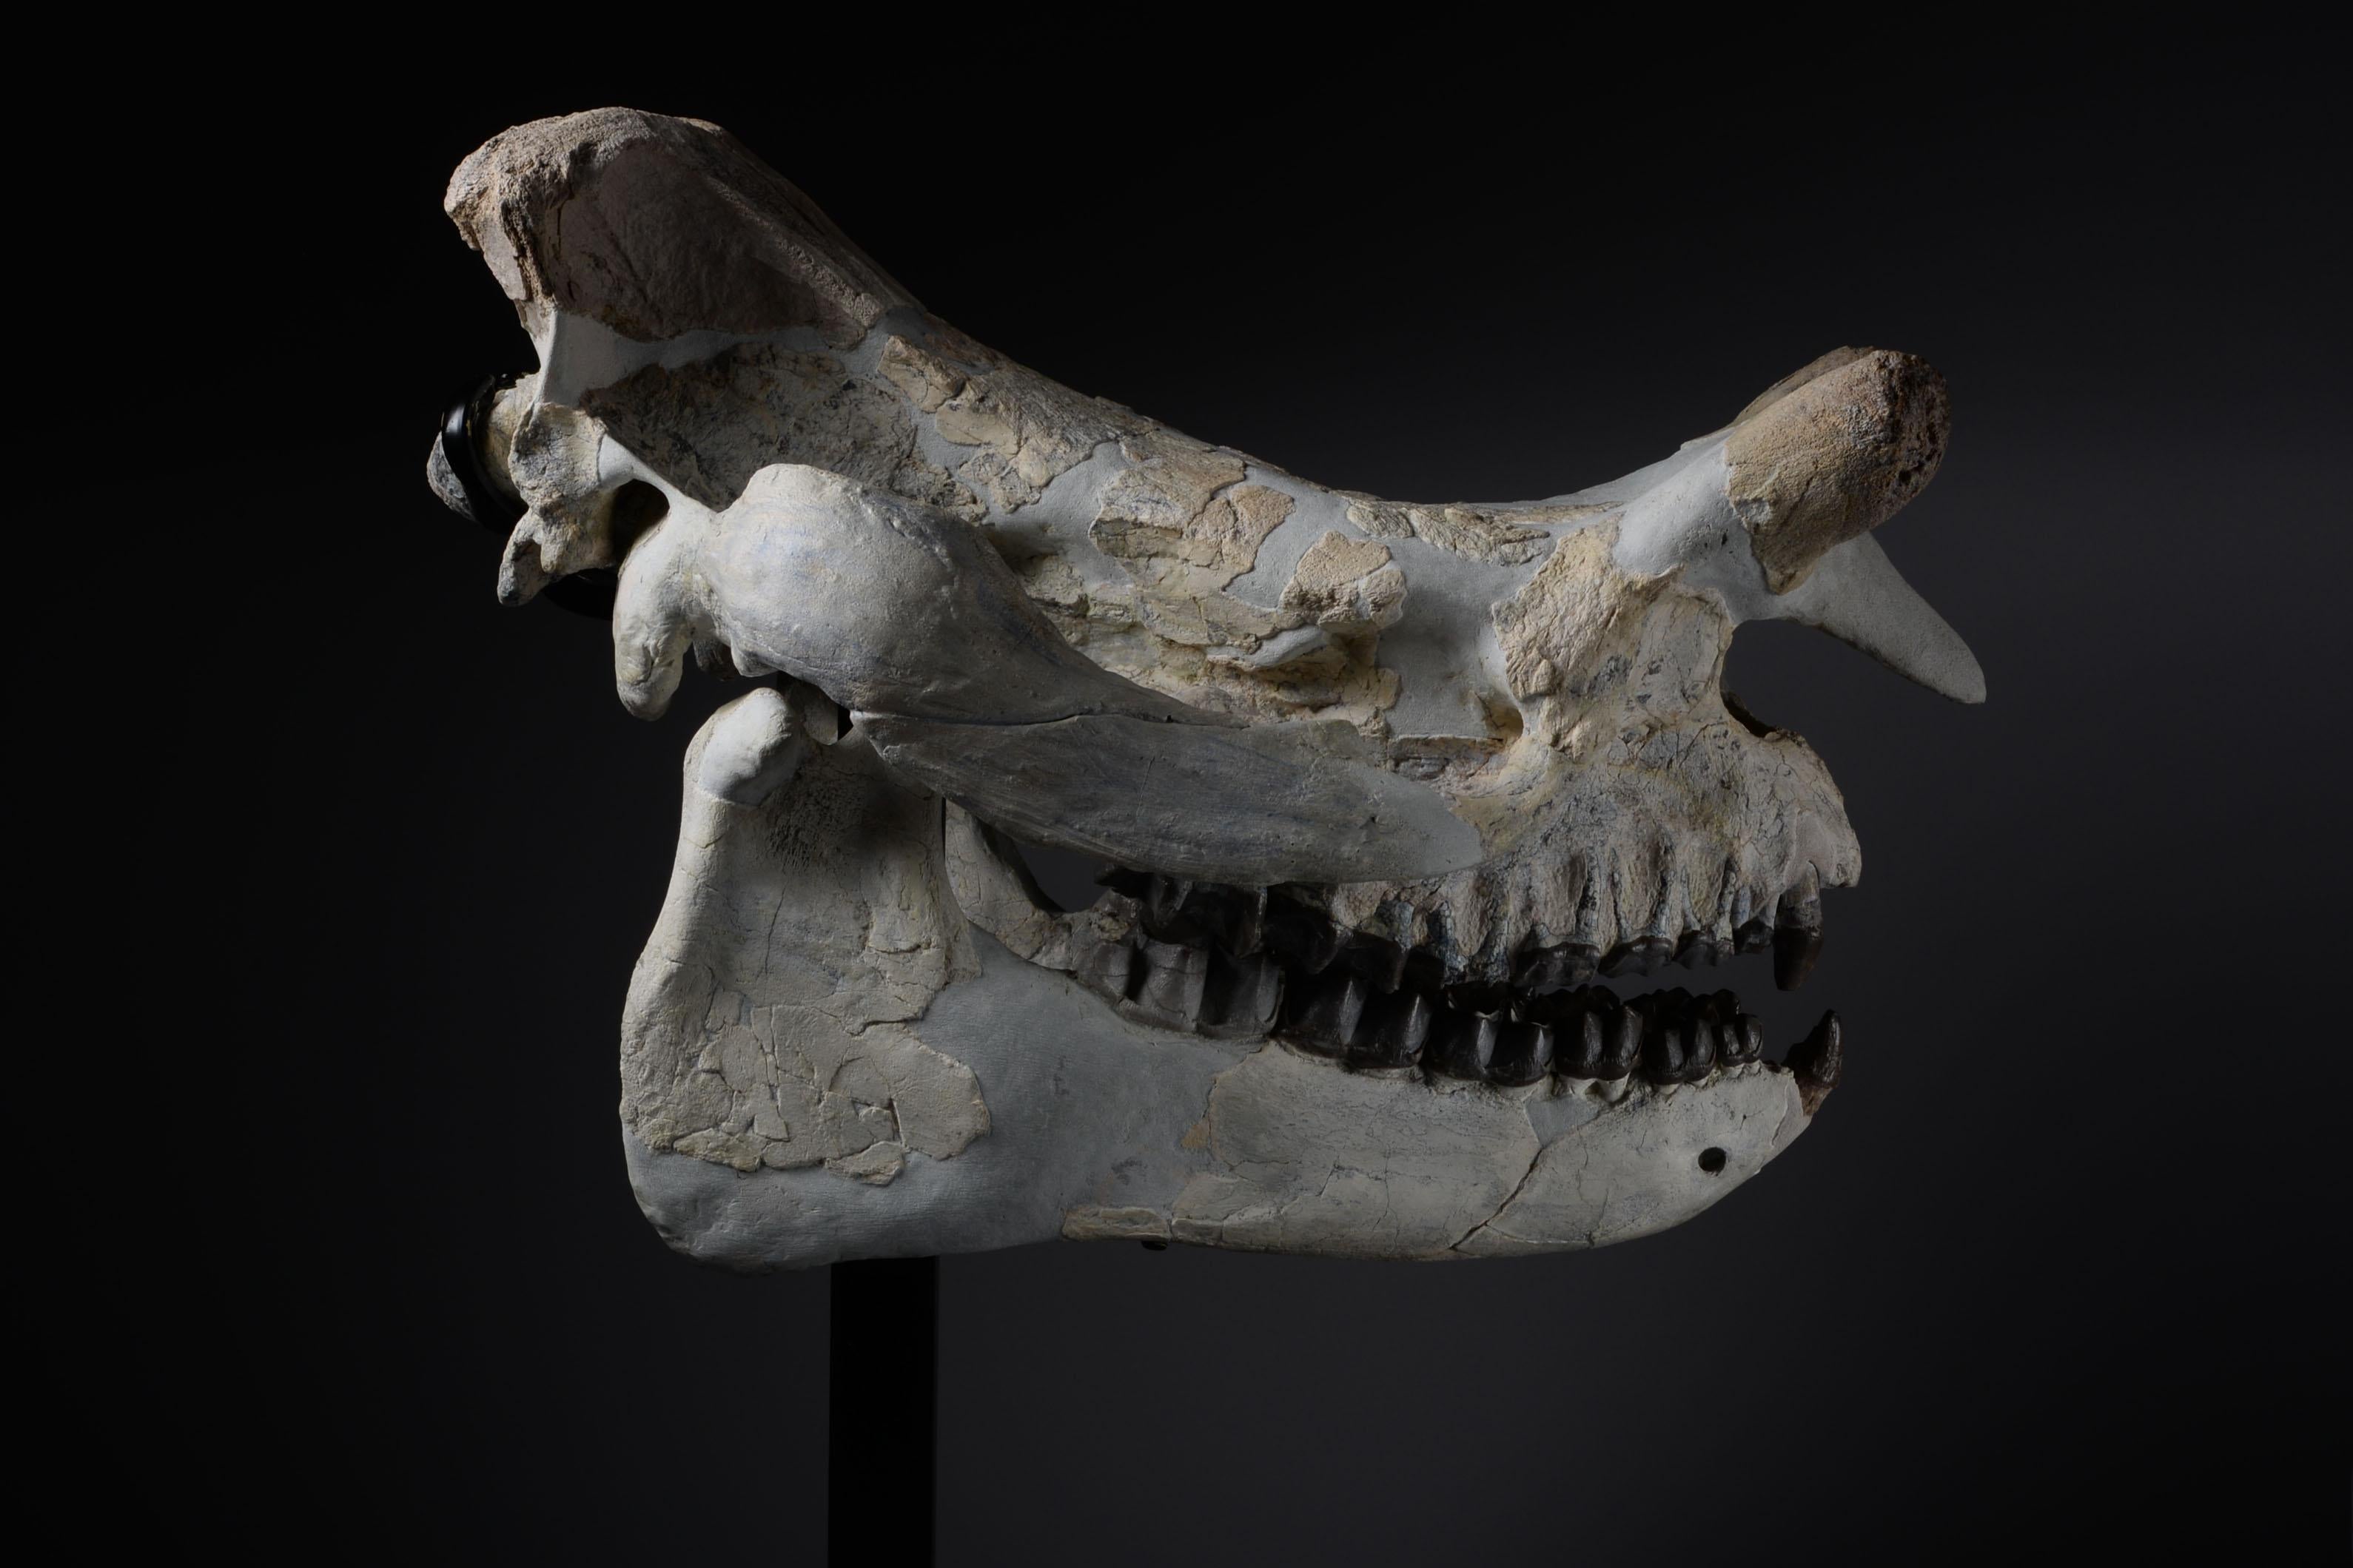 Megacerops skull, Chadron formation, Late Eocene, 38-34 million years before present.


Length: 29 inches (73.7 cm).

Condition: Restored from fragments, approximately 70% complete.

With a steel bracket for vertically wall mounting the skull, and